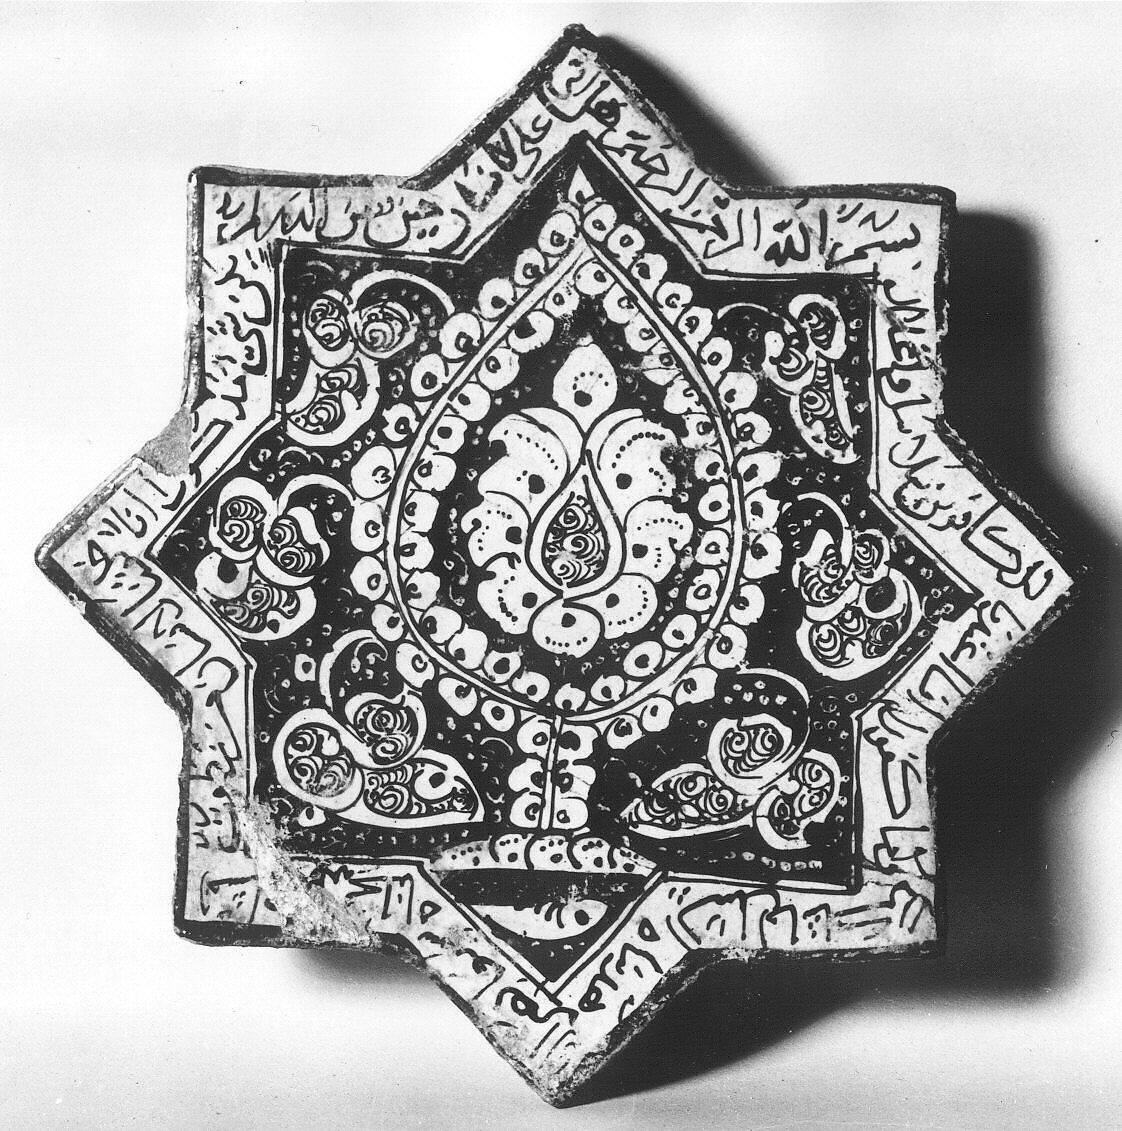 Star-Shaped Tile, Stonepaste; luster-painted with touches of cobalt on opaque white glaze under transparent glaze 